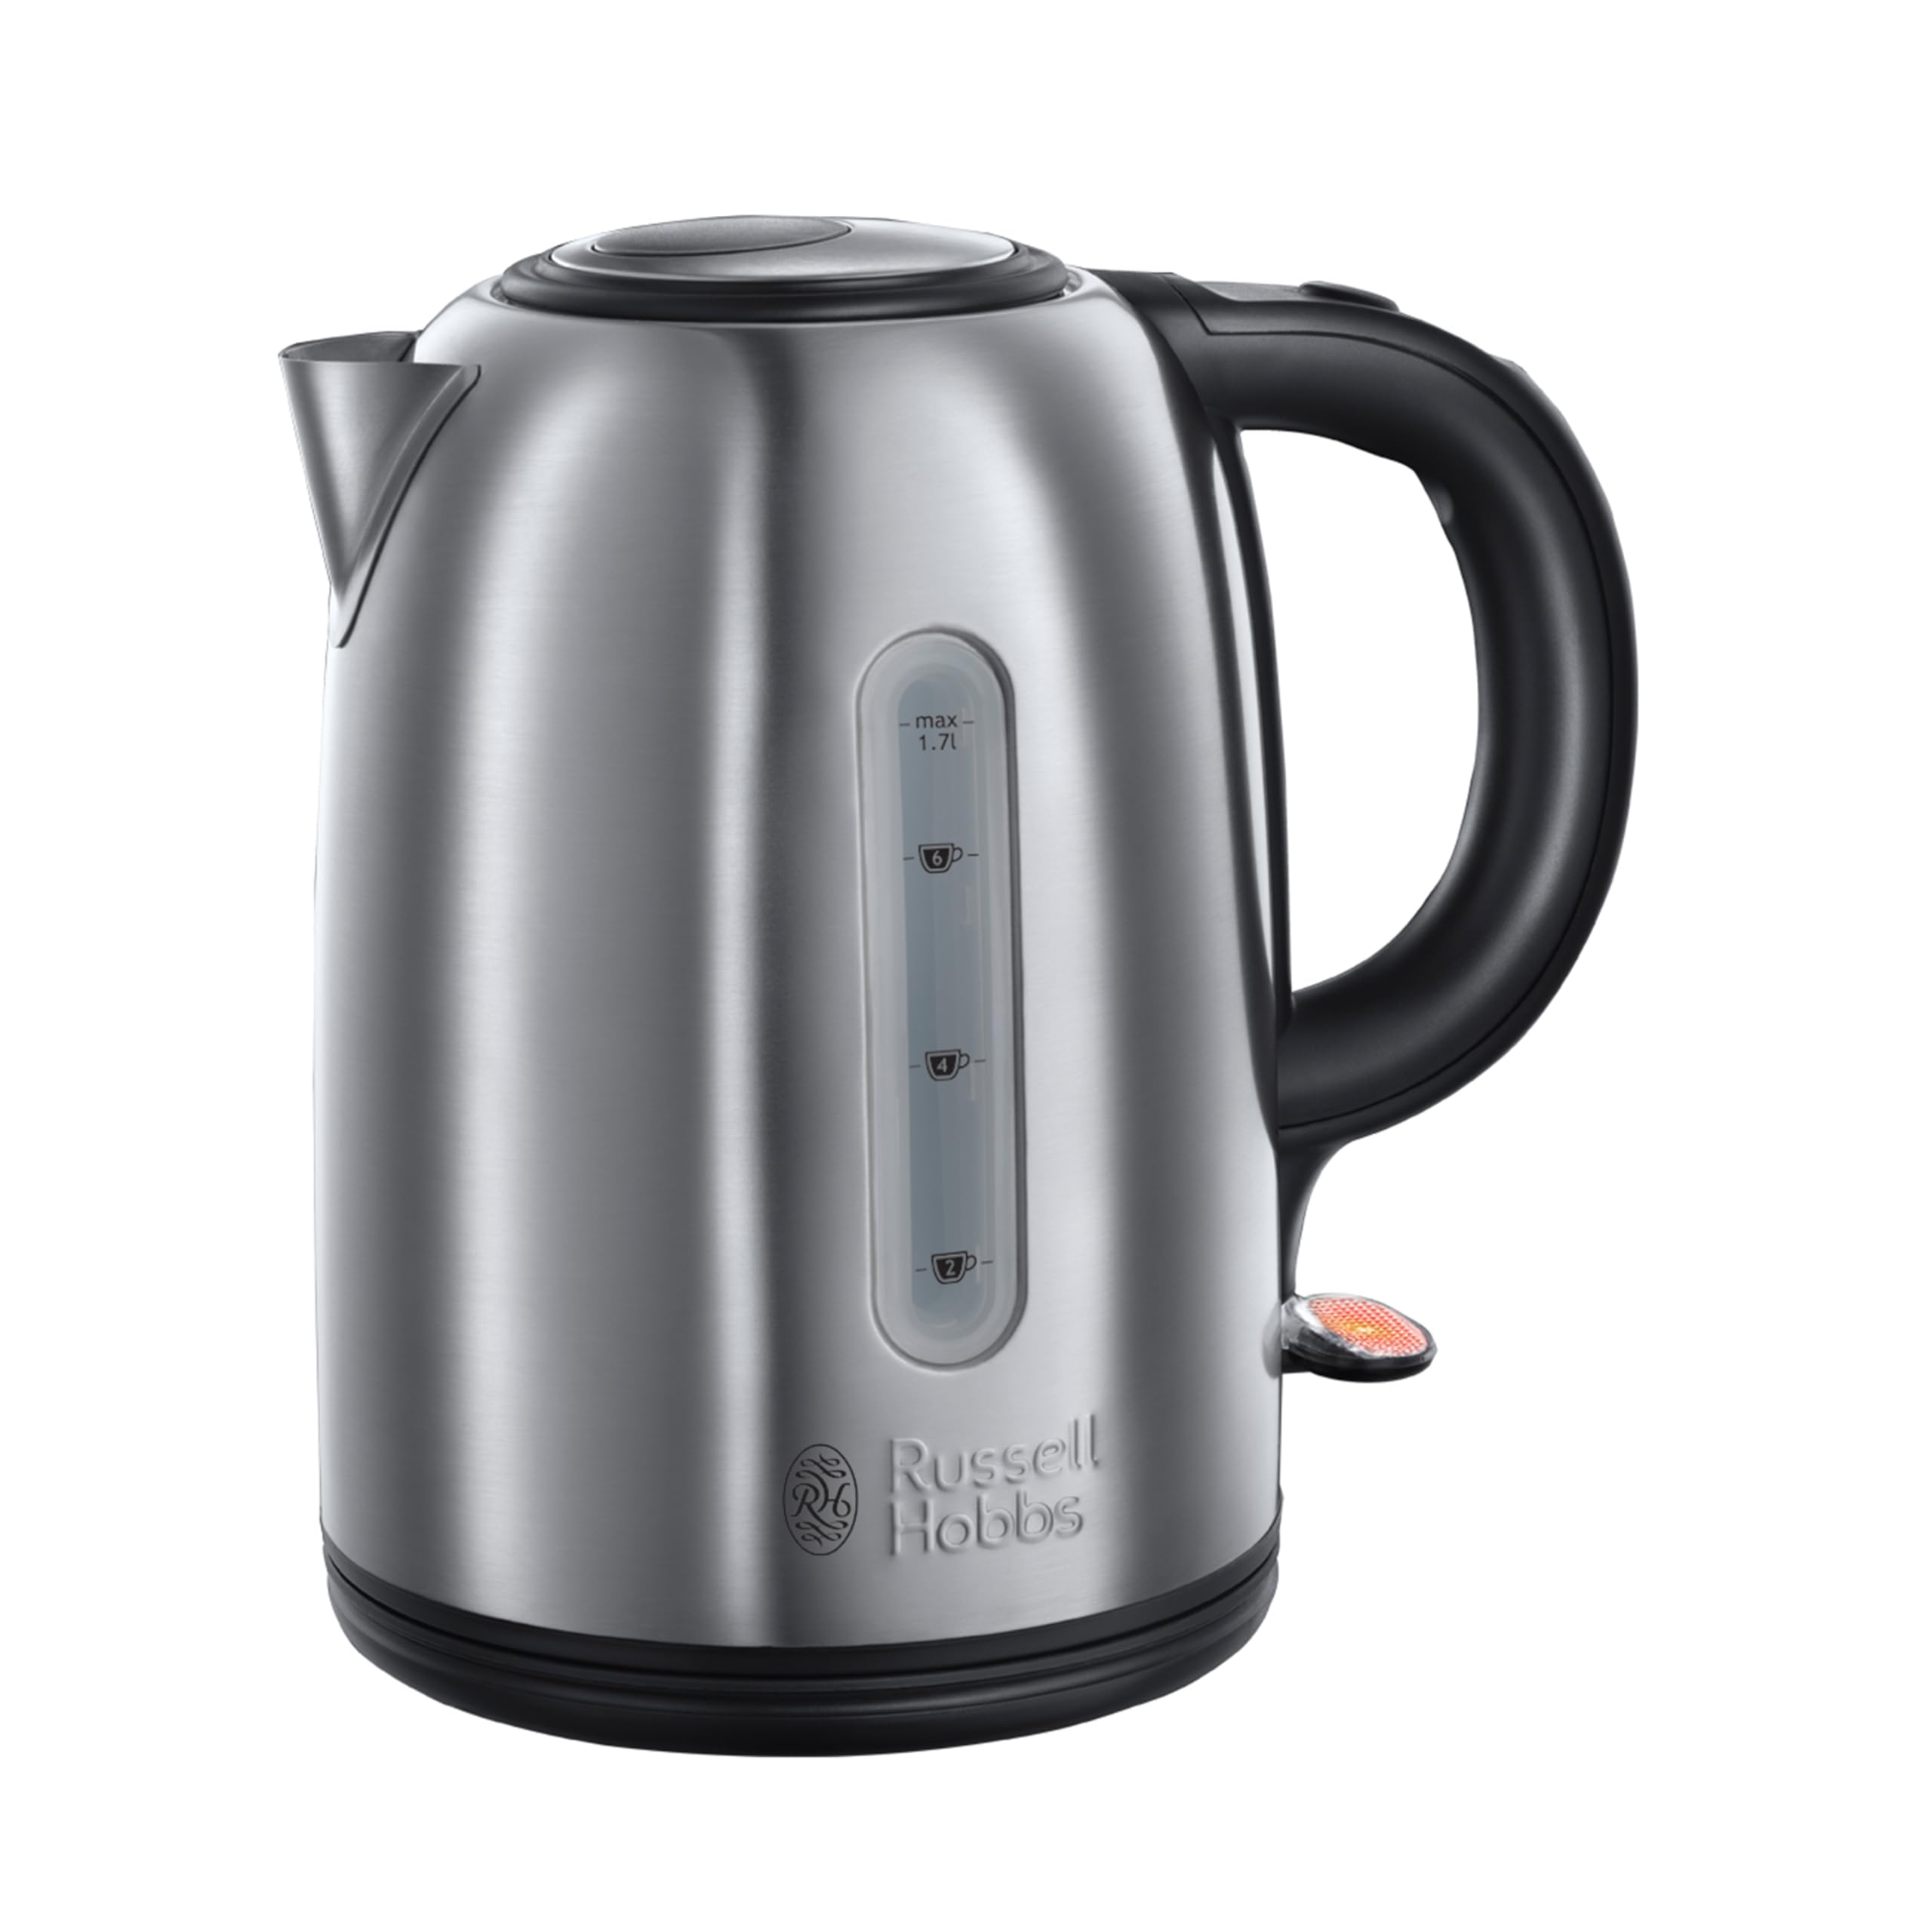 RUSsell Hobbs Snowdon Stainless Steel Electric Kettle For Home & Office 1.7L, 3000W 20441, 2 Years Warranty, 1 - Pack